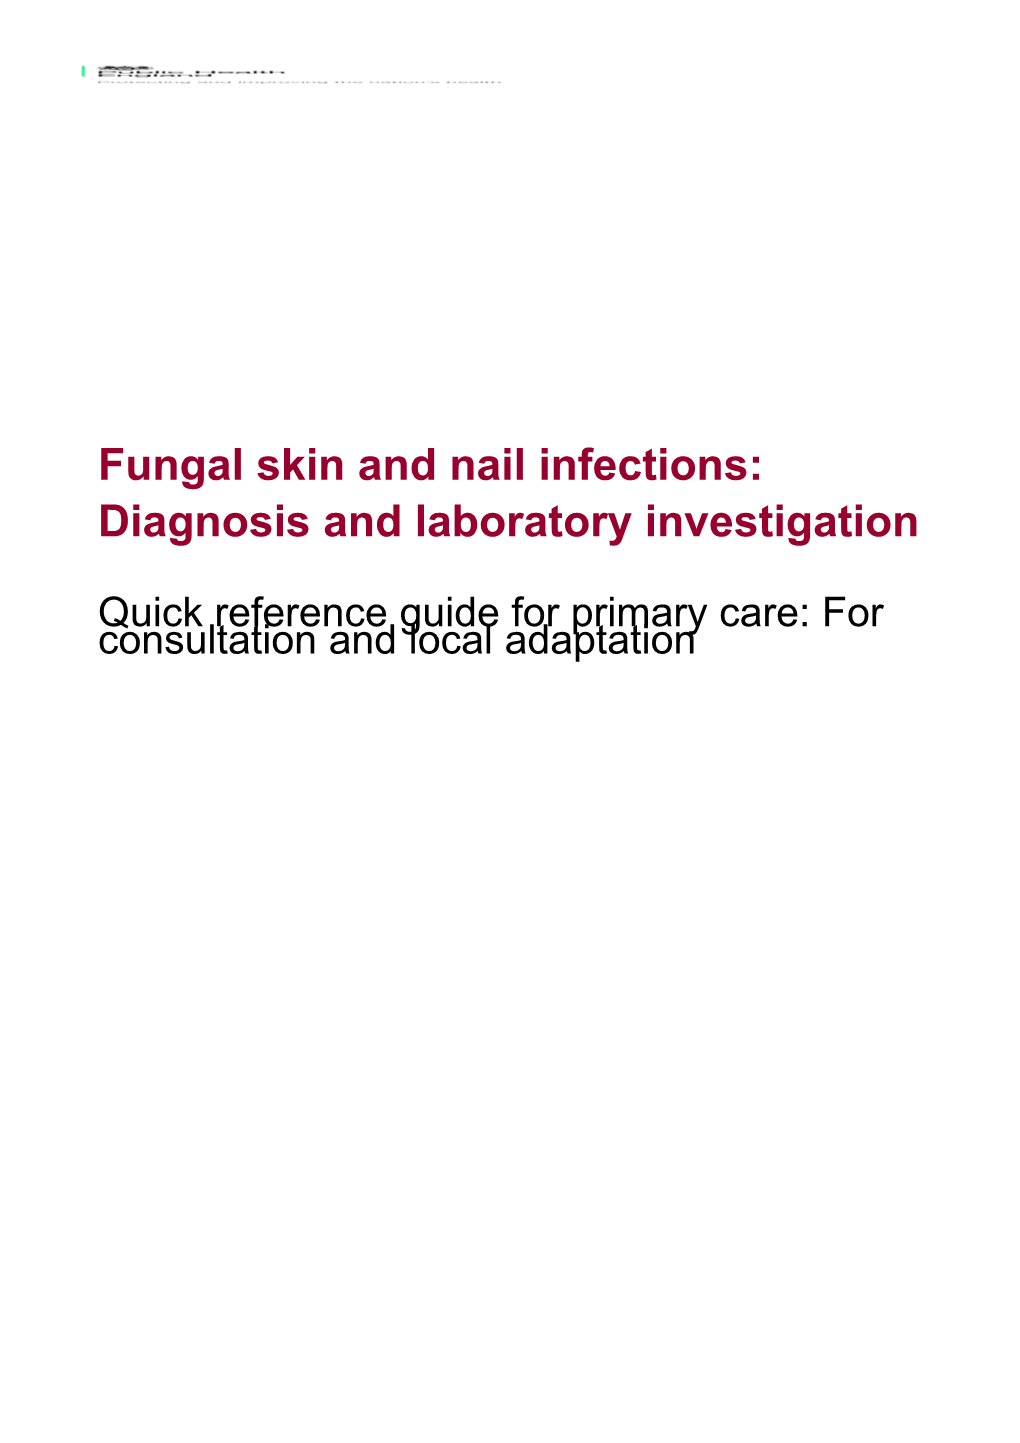 Fungal Skin and Nail Infections: Diagnosis and Laboratory Investigation